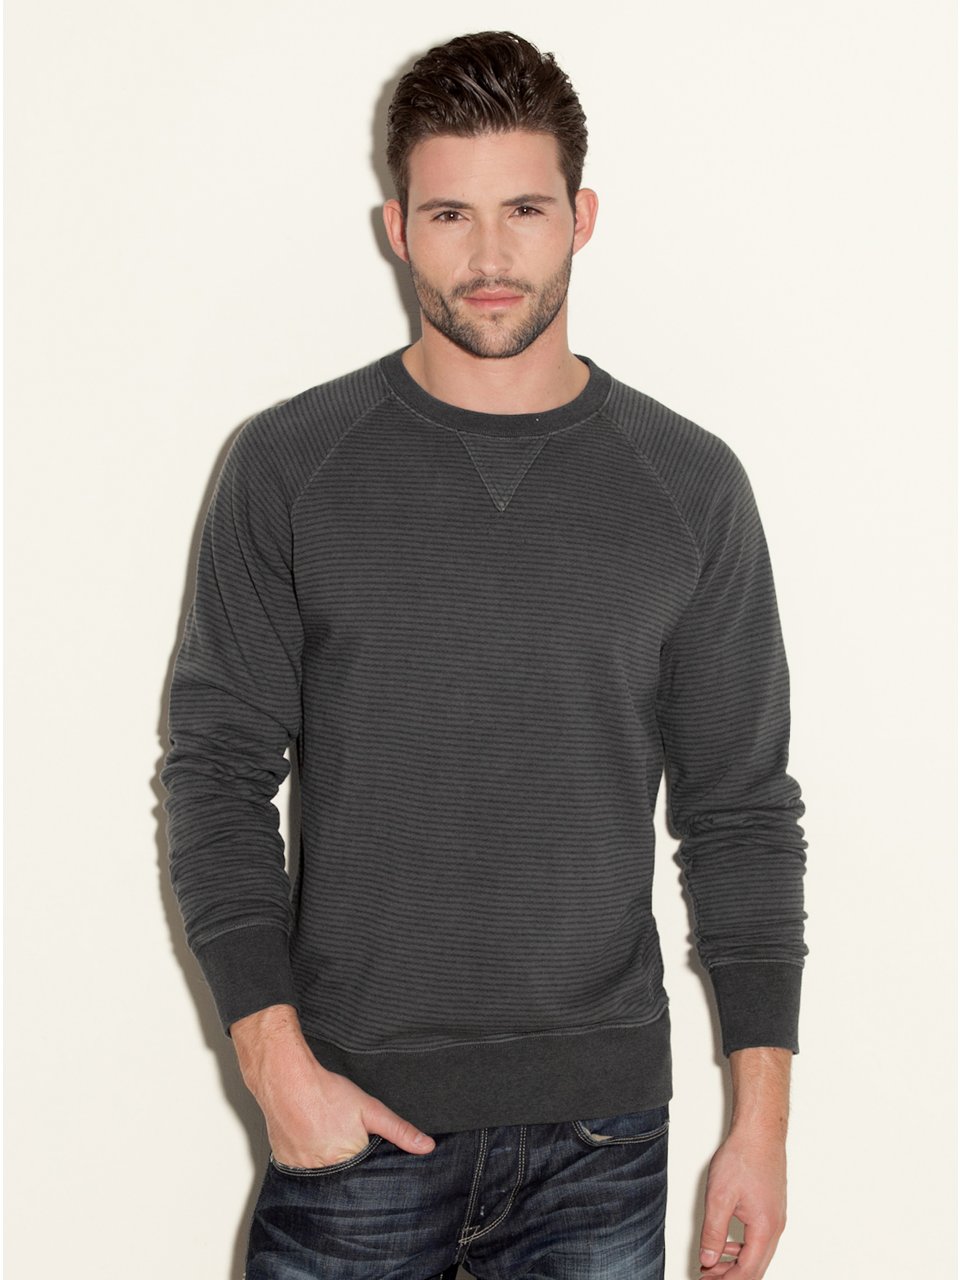 Aliexpress.com : Buy Vomint Brand Cotton Mens Sweaters V